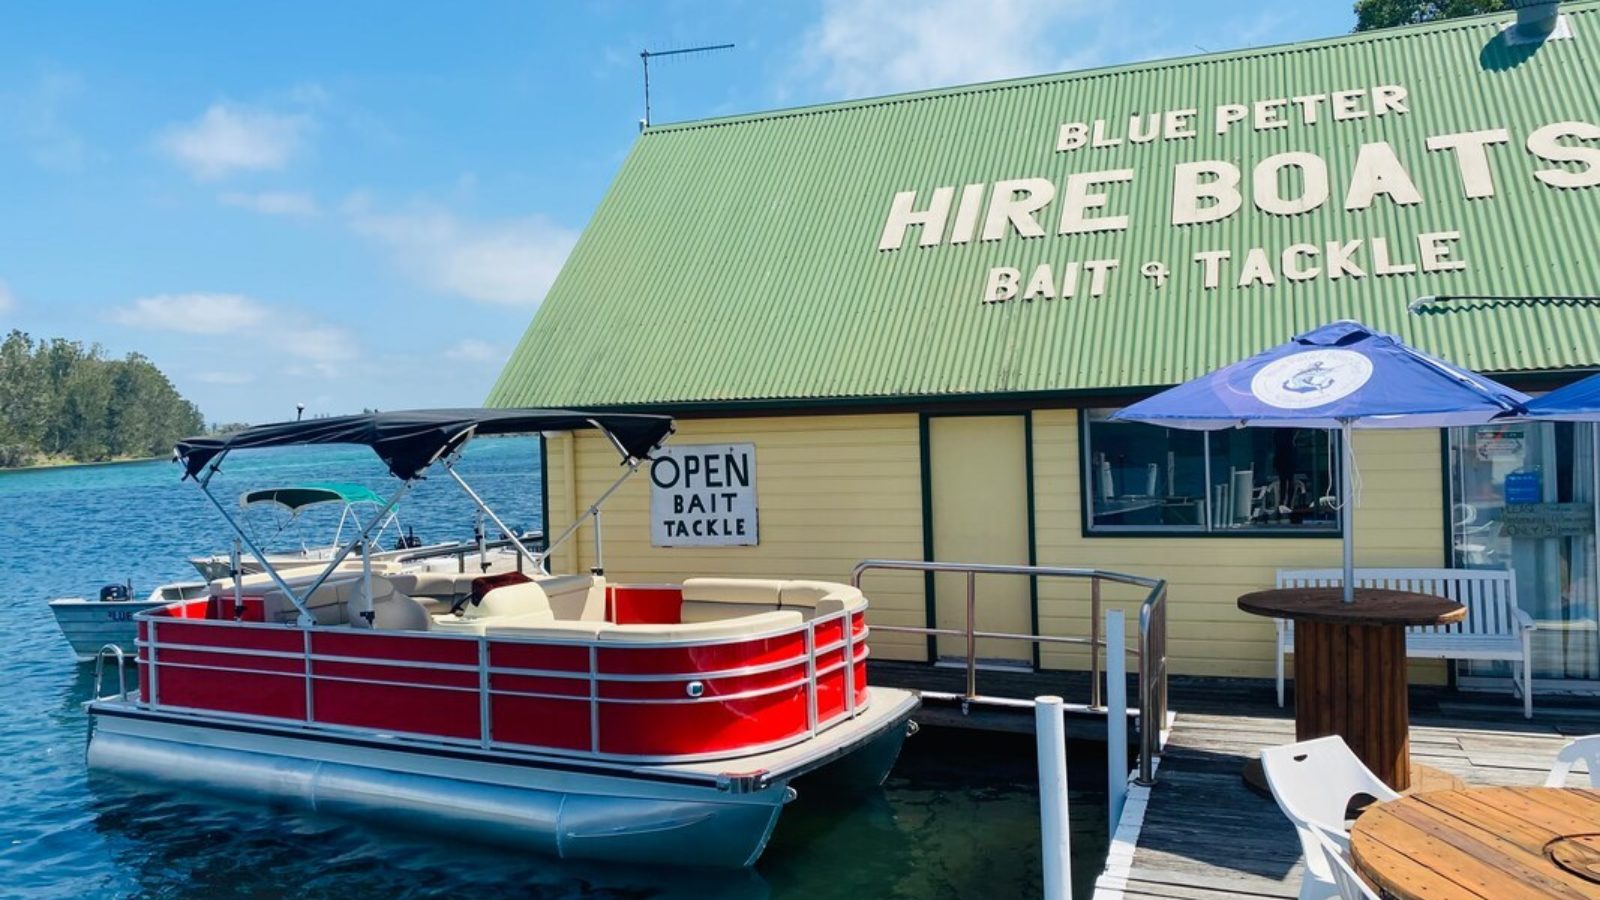 Barbecue boat hire from Blue Peter Boatshed Forster